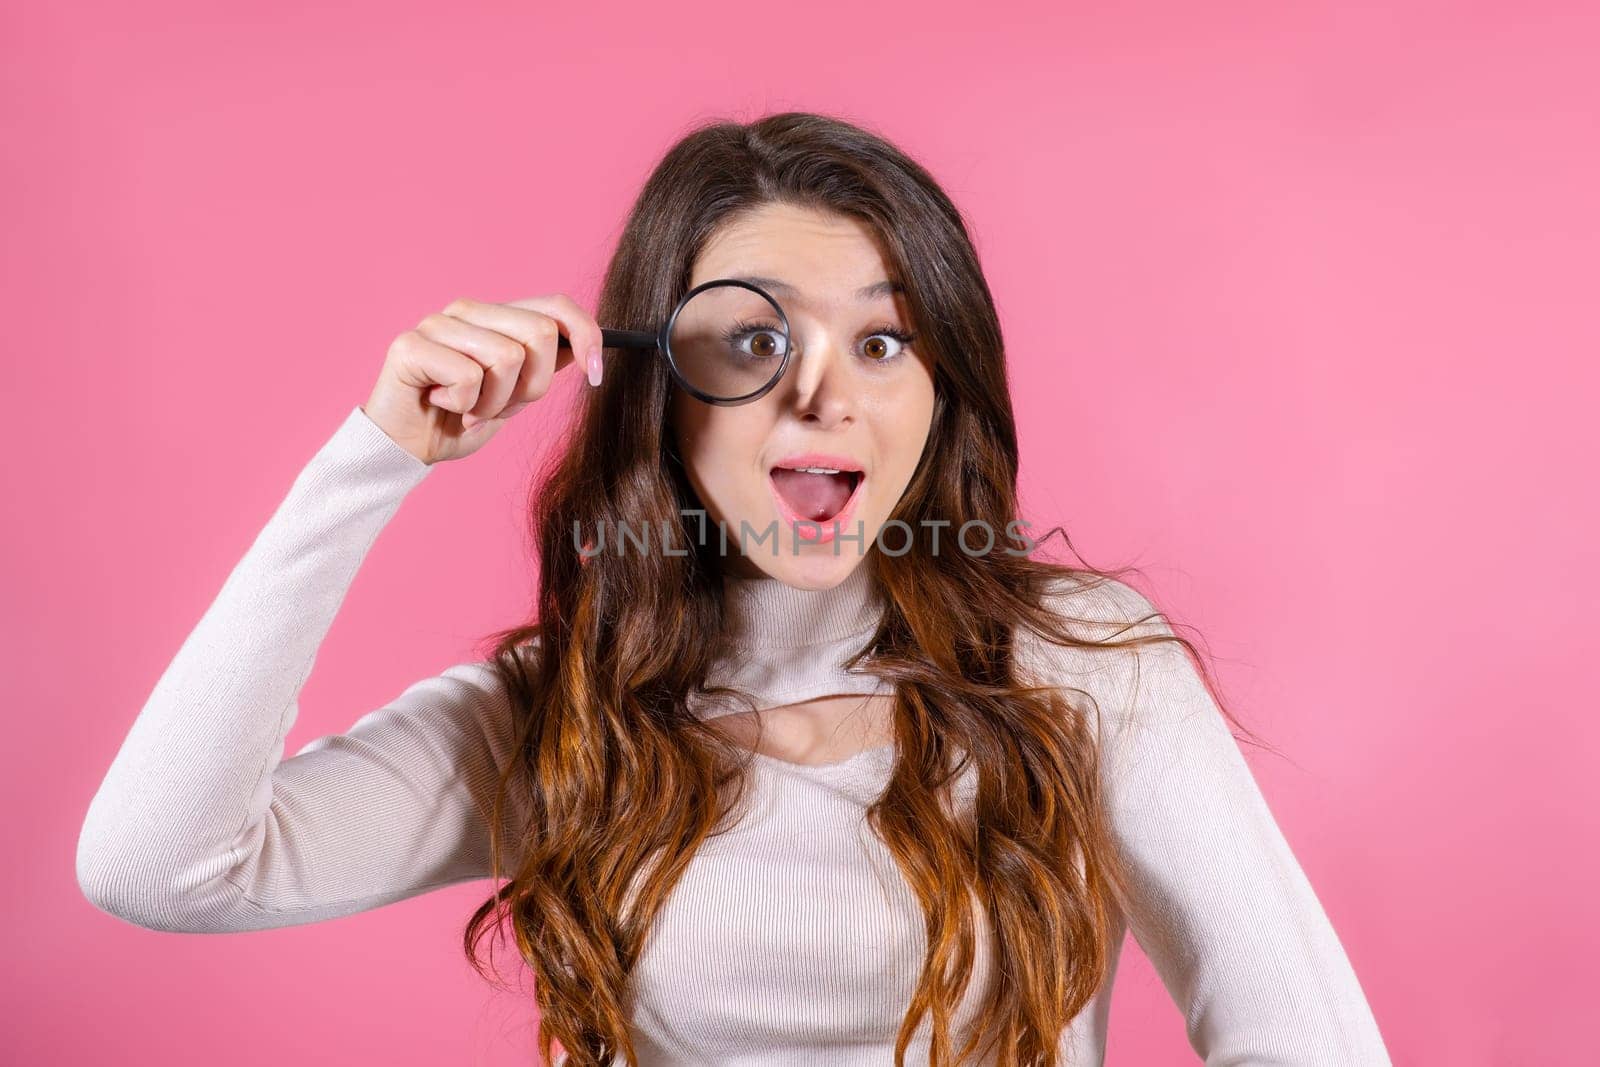 Funny woman looking through magnifying glass against pink background by vladimka